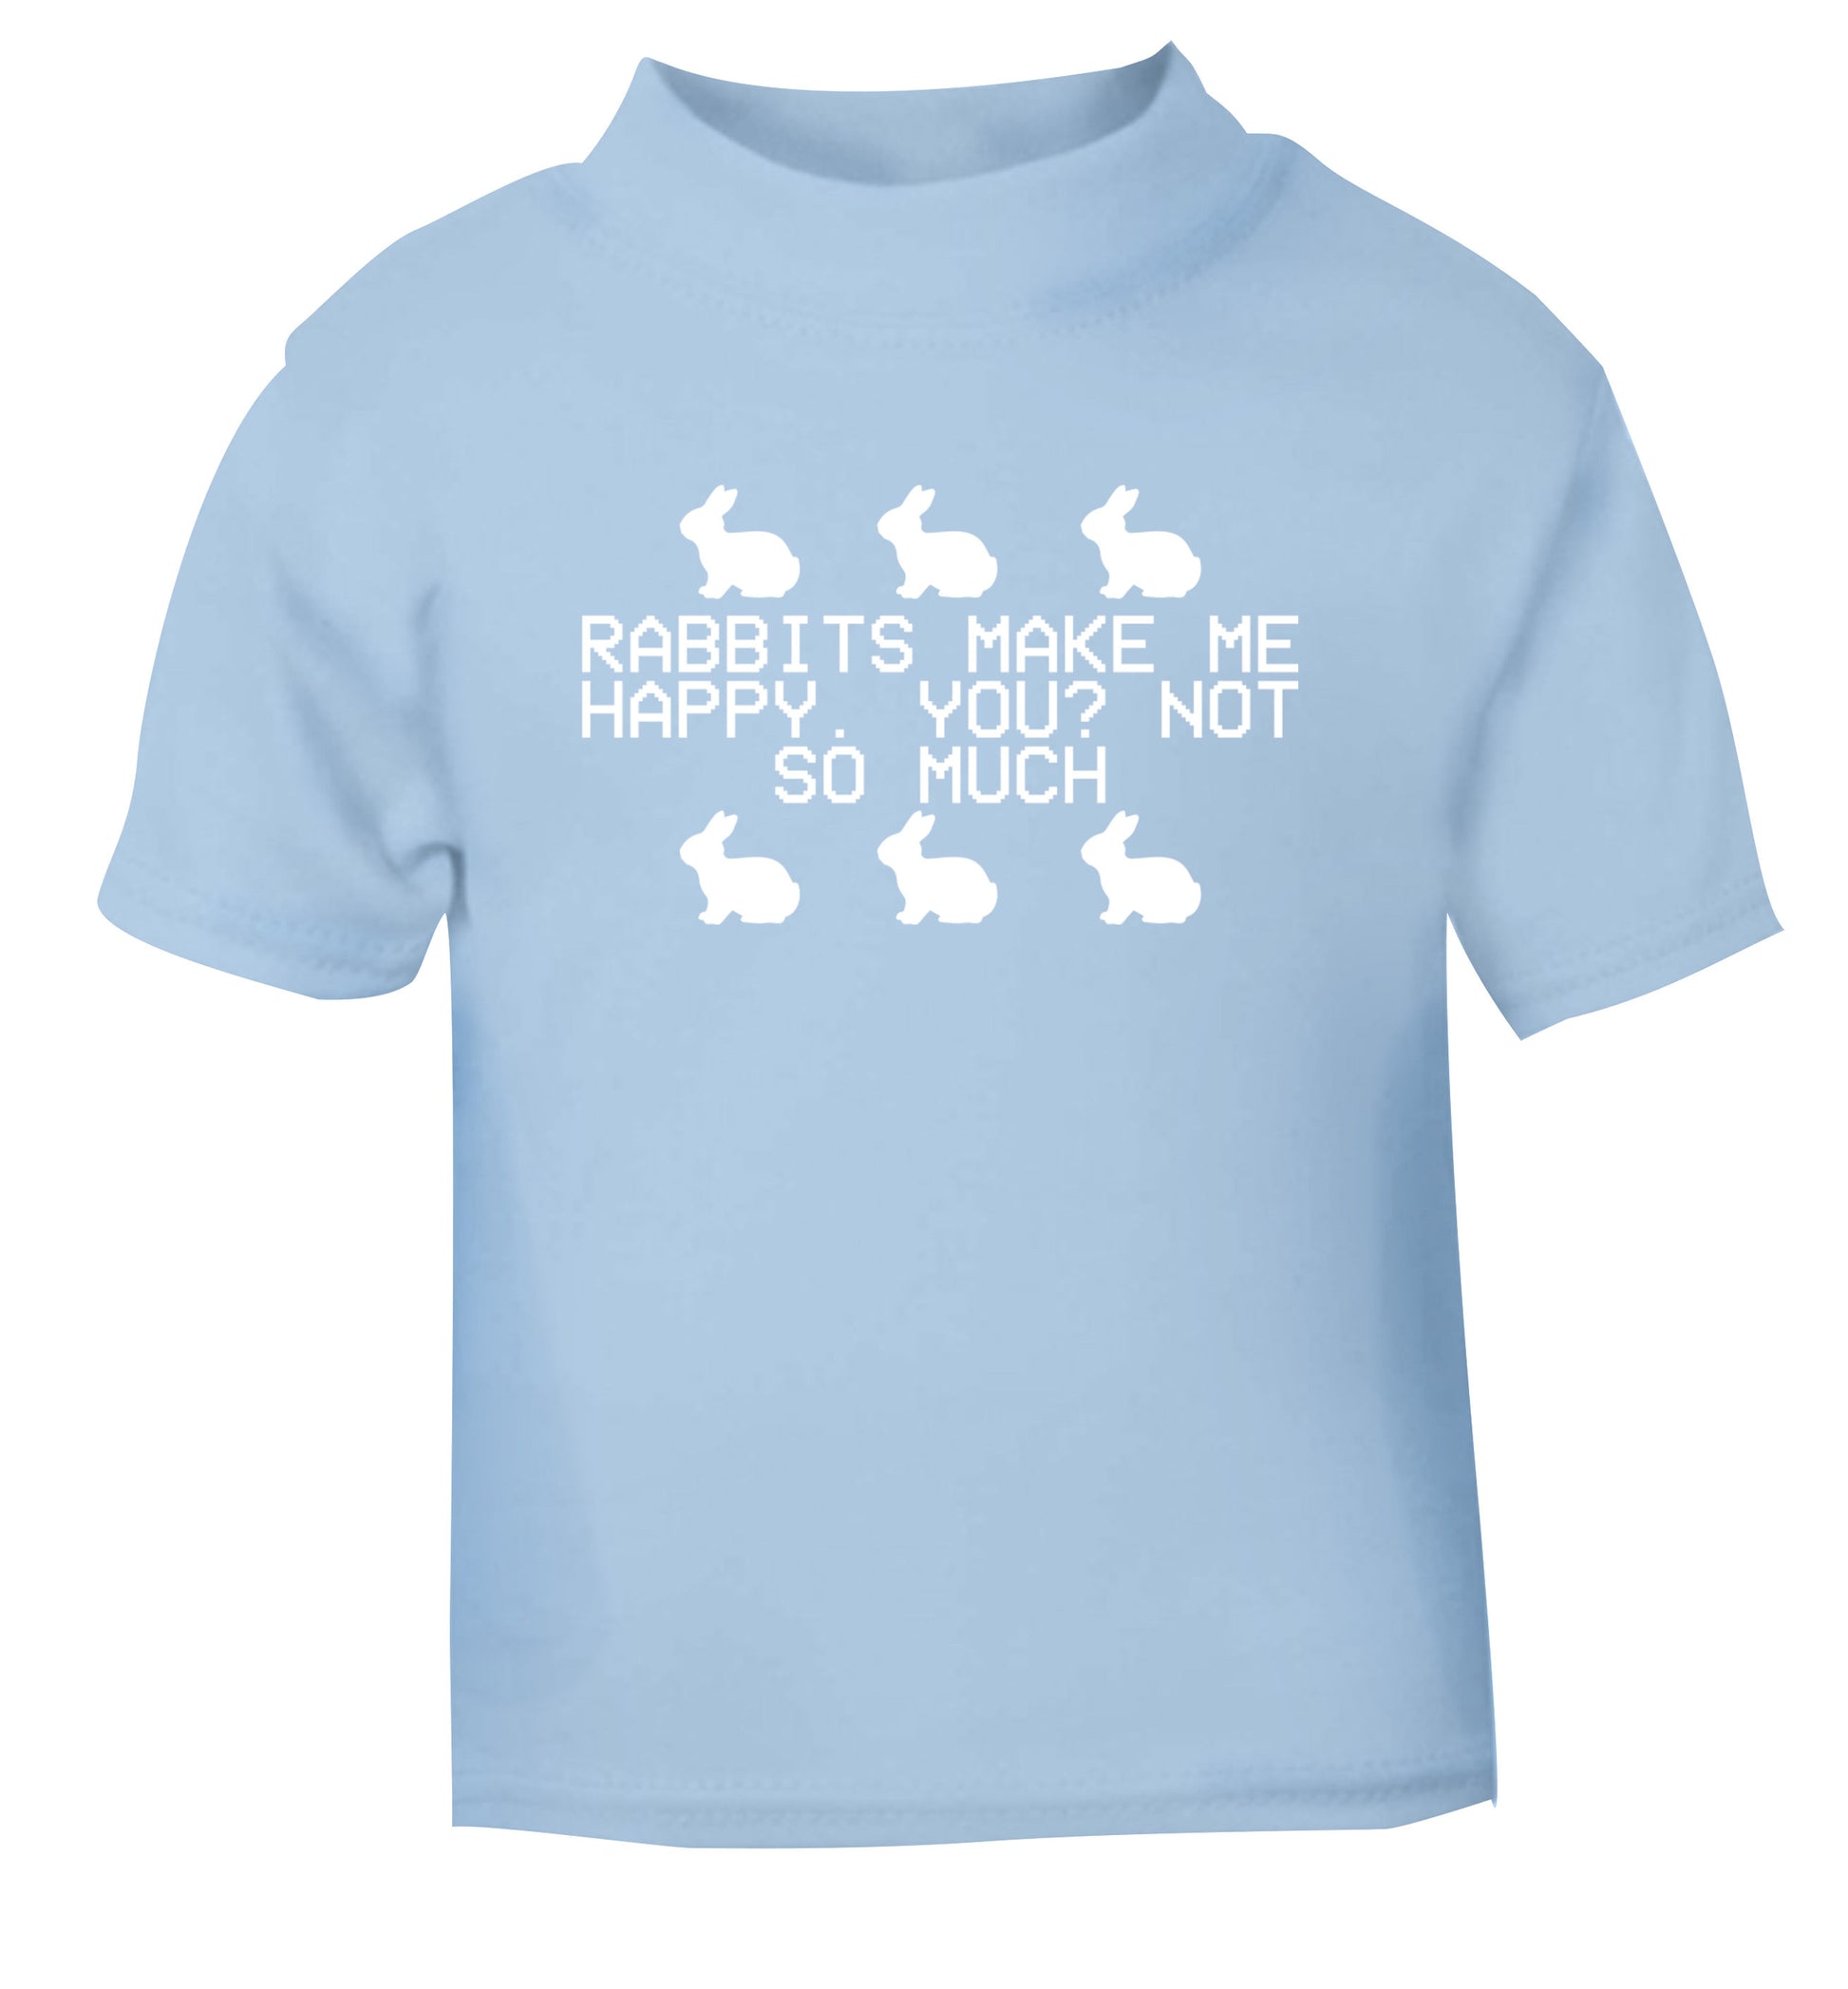 Rabbits make me happy, you not so much light blue Baby Toddler Tshirt 2 Years